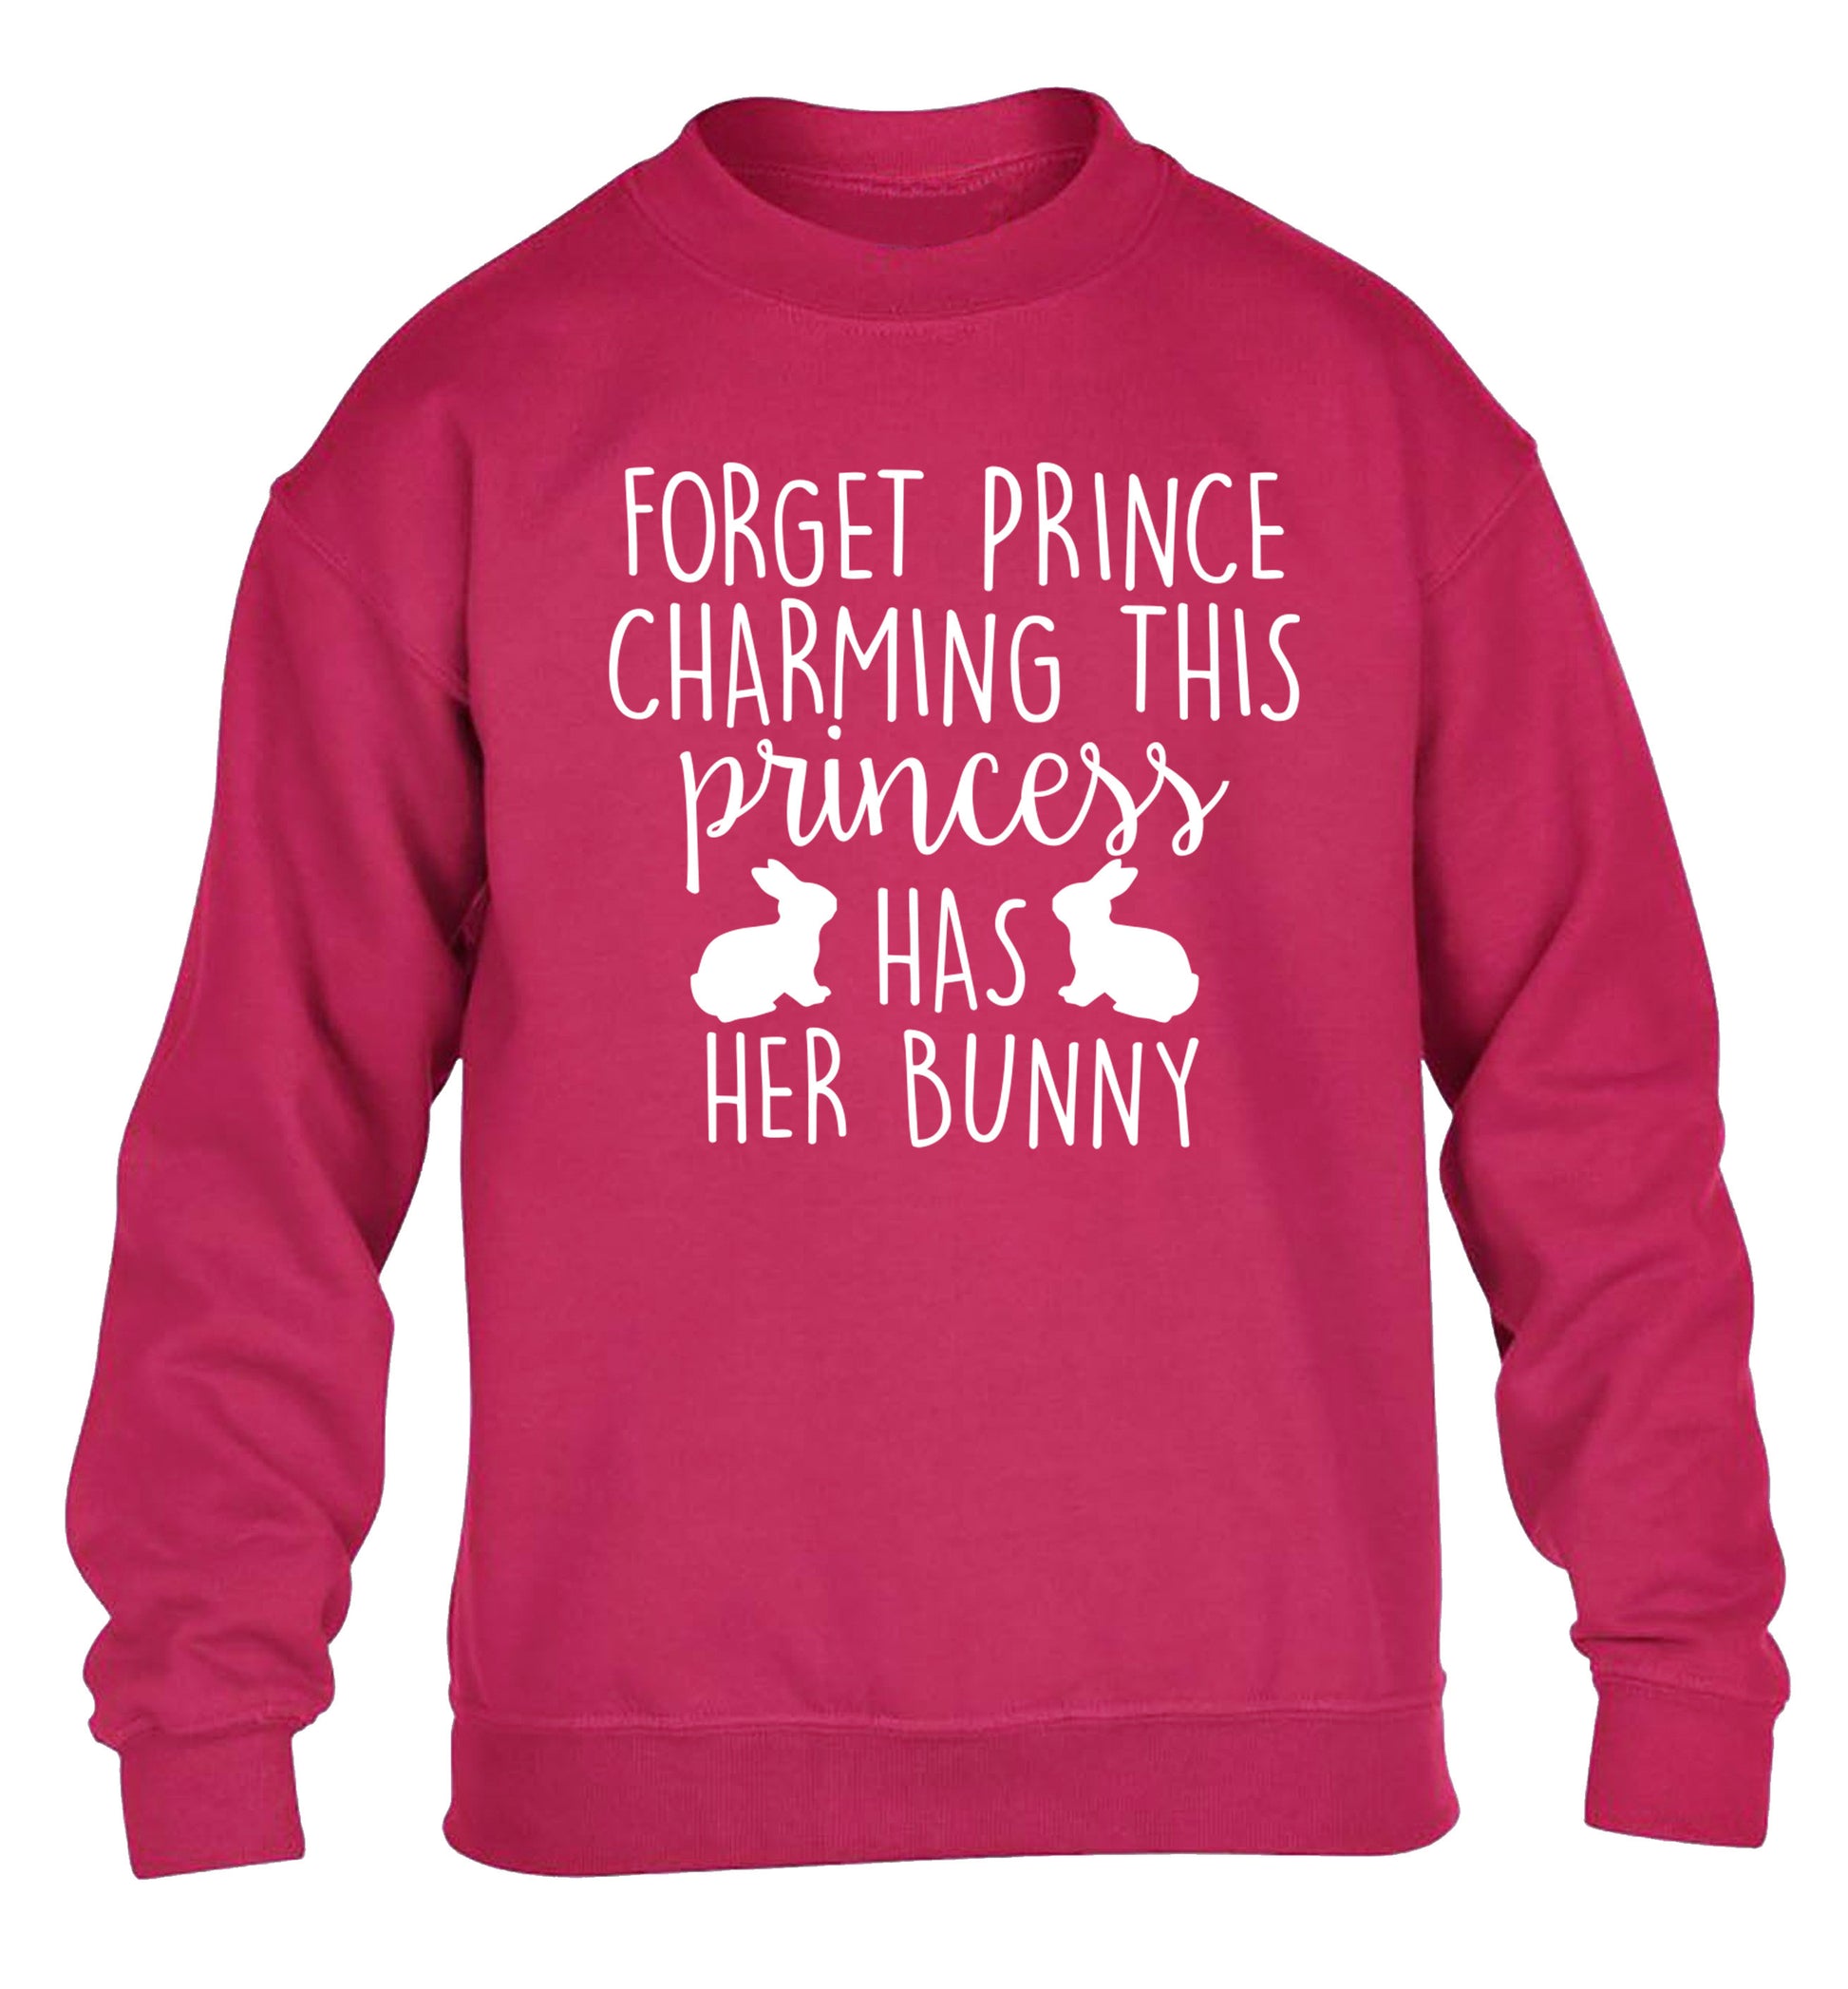 Forget prince charming this princess has her bunny children's pink  sweater 12-14 Years